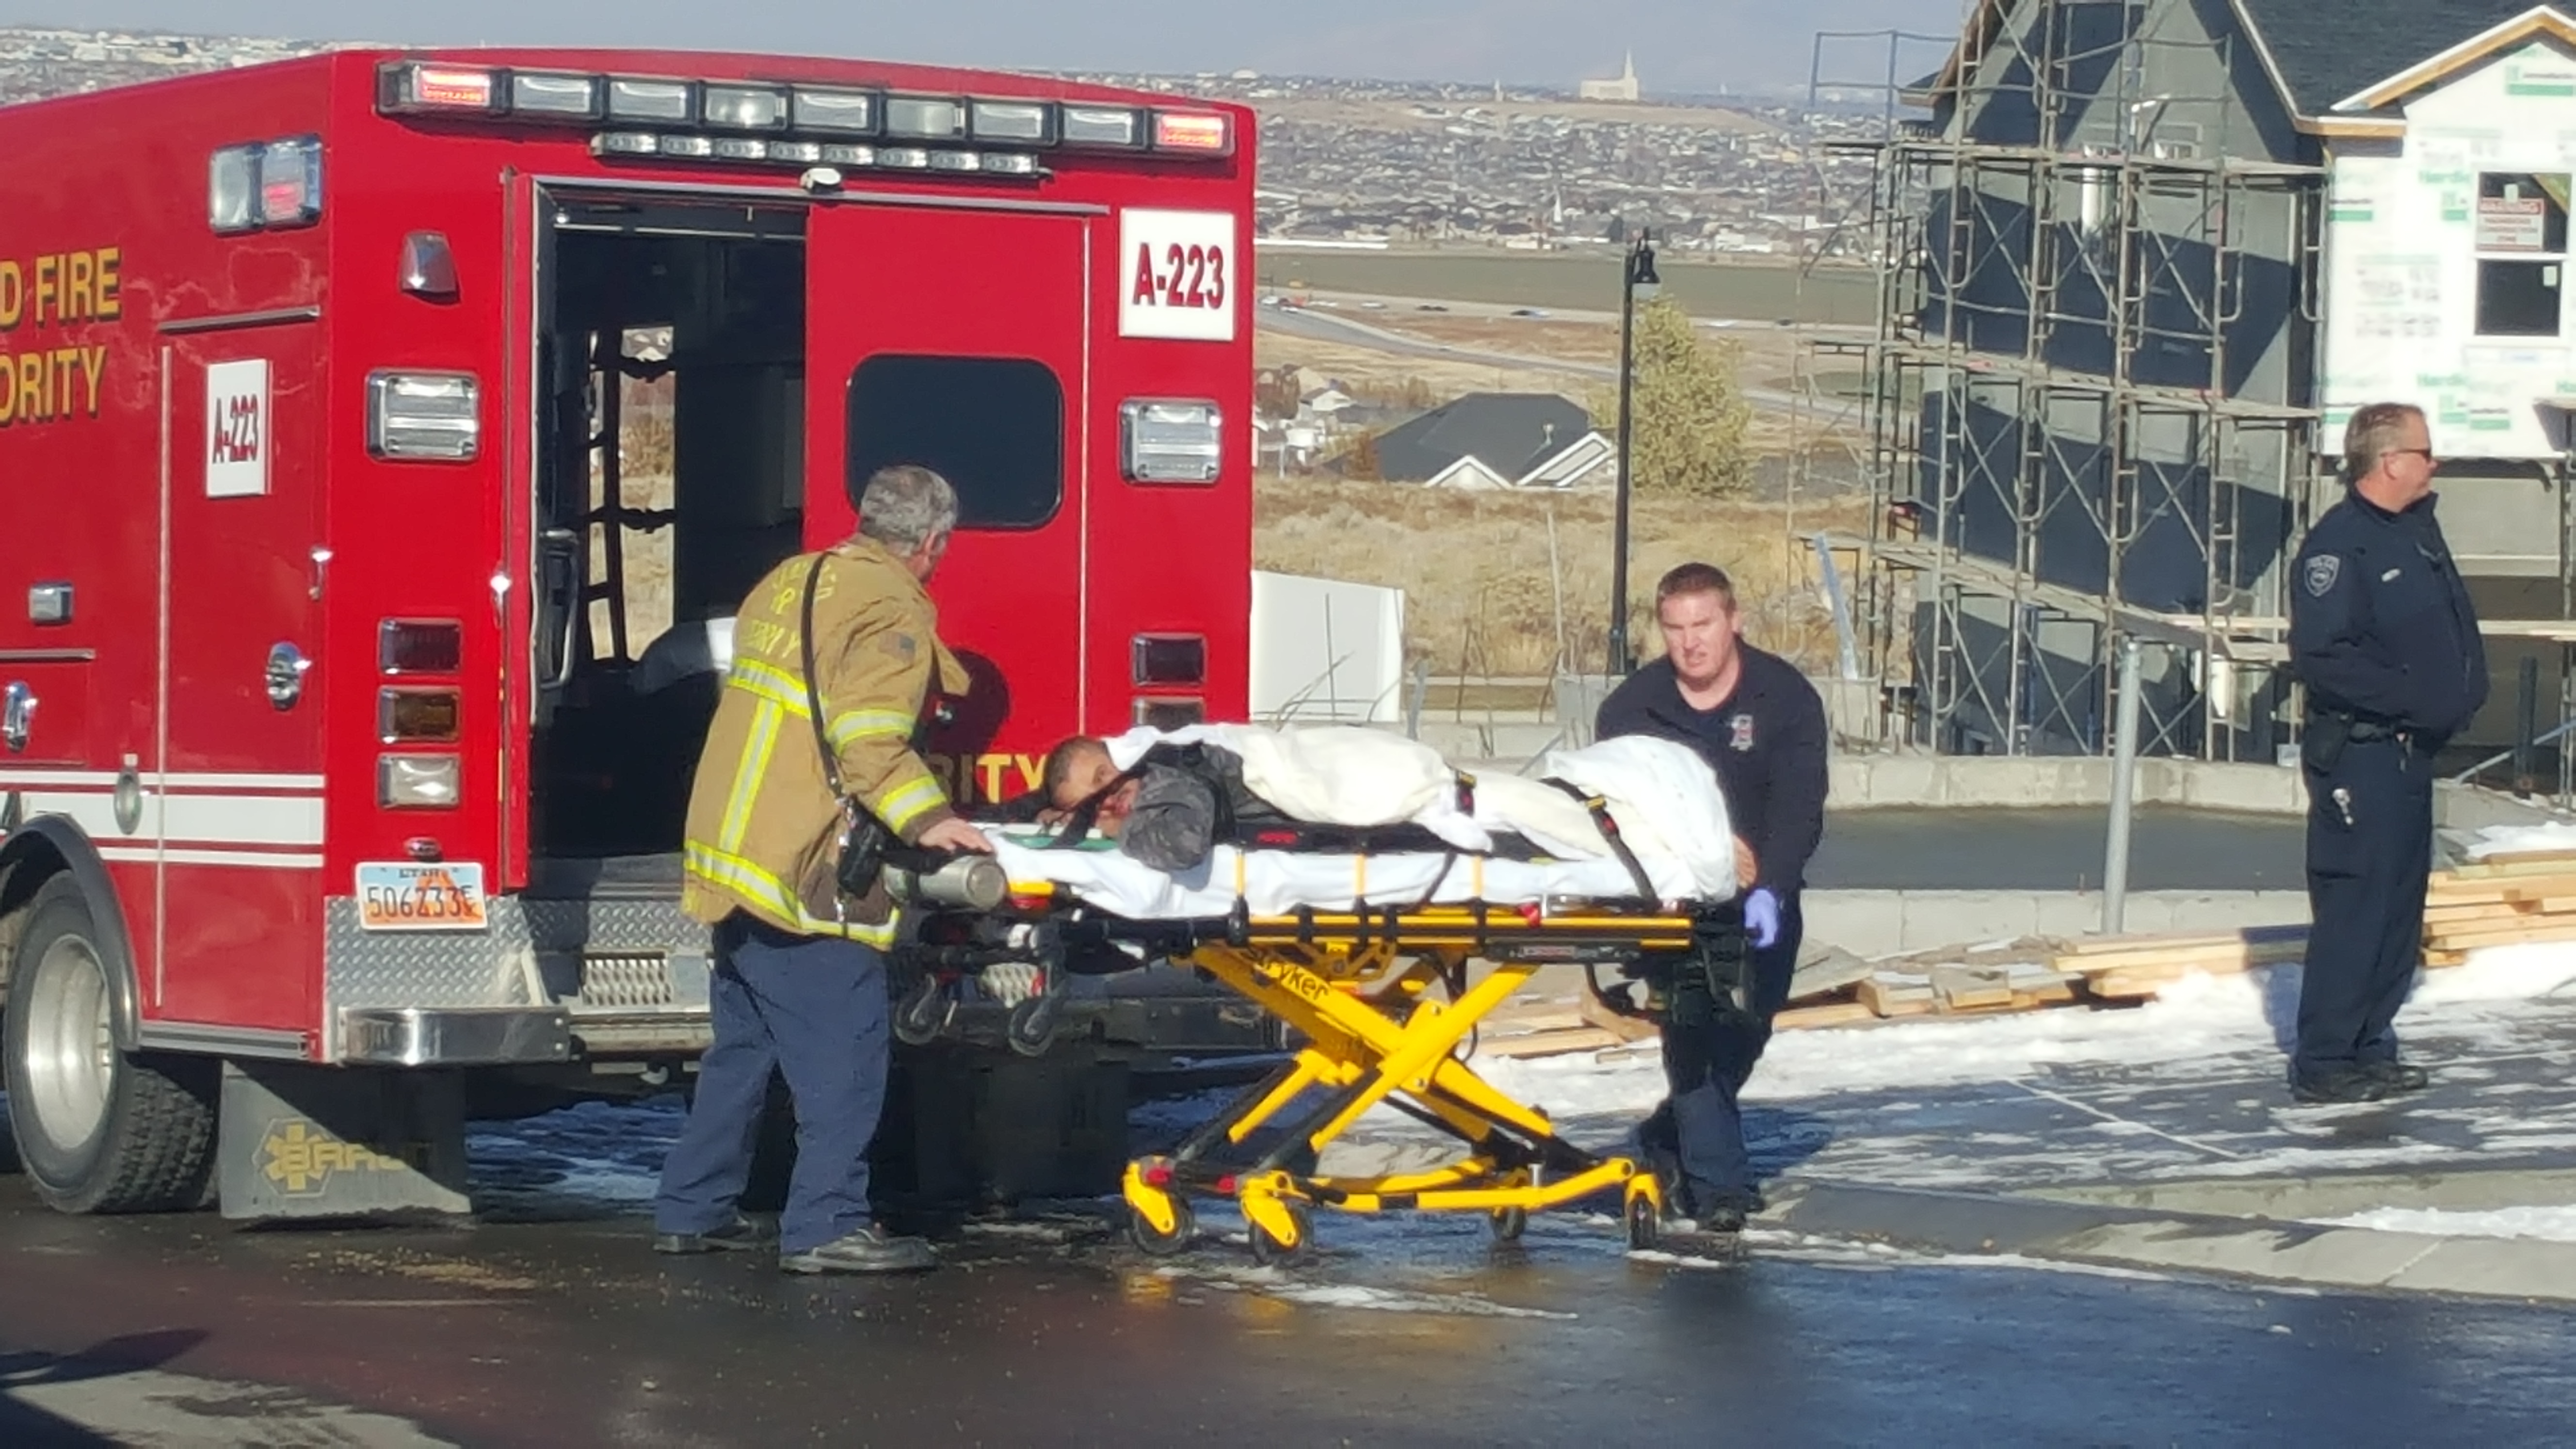 Two men were injured Tuesday afternoon in an industrial accident in Herriman. The men were building a wall, which fell on them. Photo: Gephardt Daily